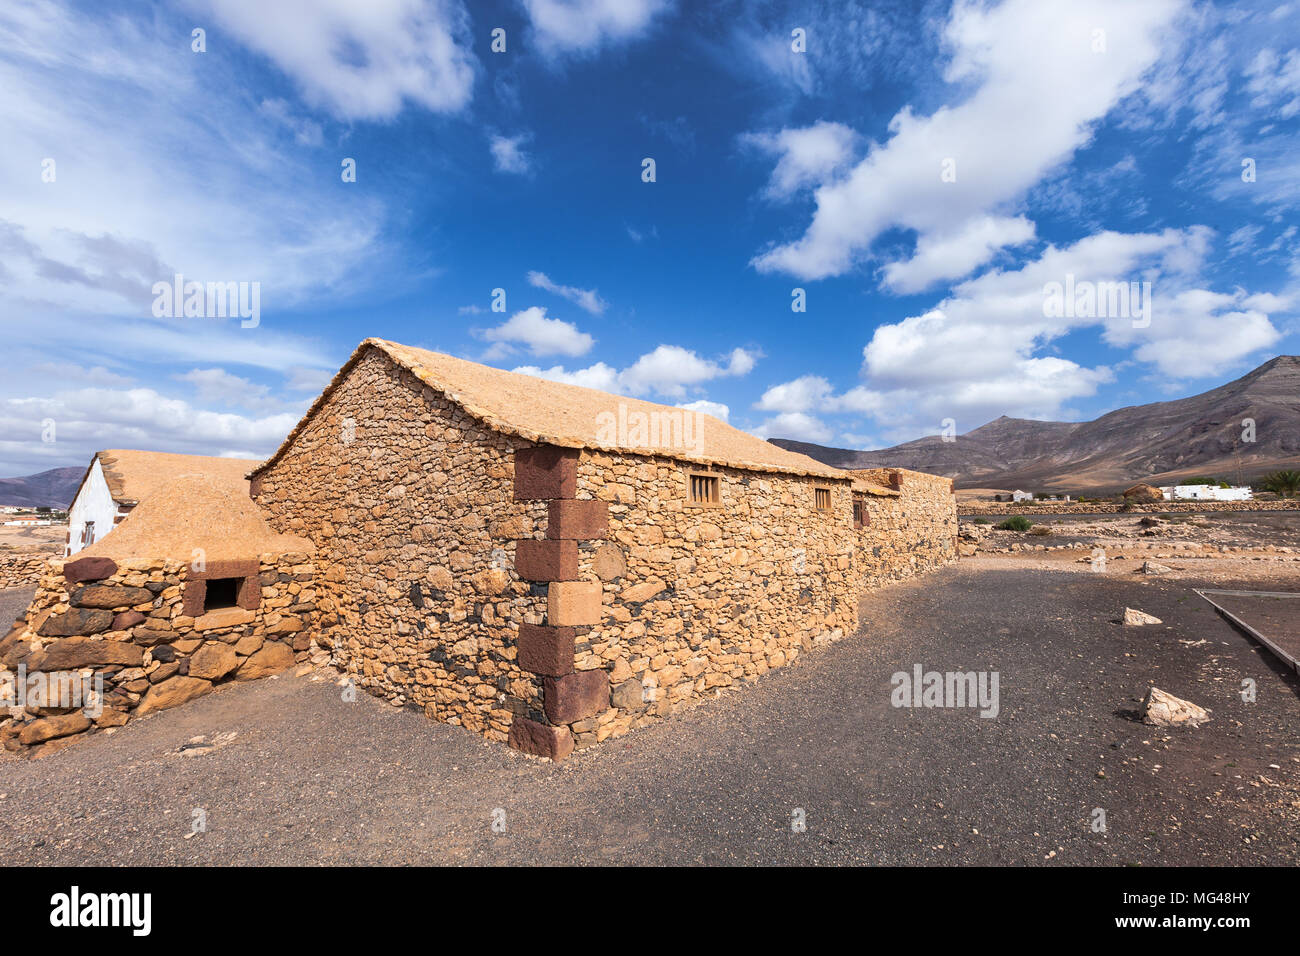 A rustic stone house on the island of Fuerteventura. Canaries. Spain Stock Photo